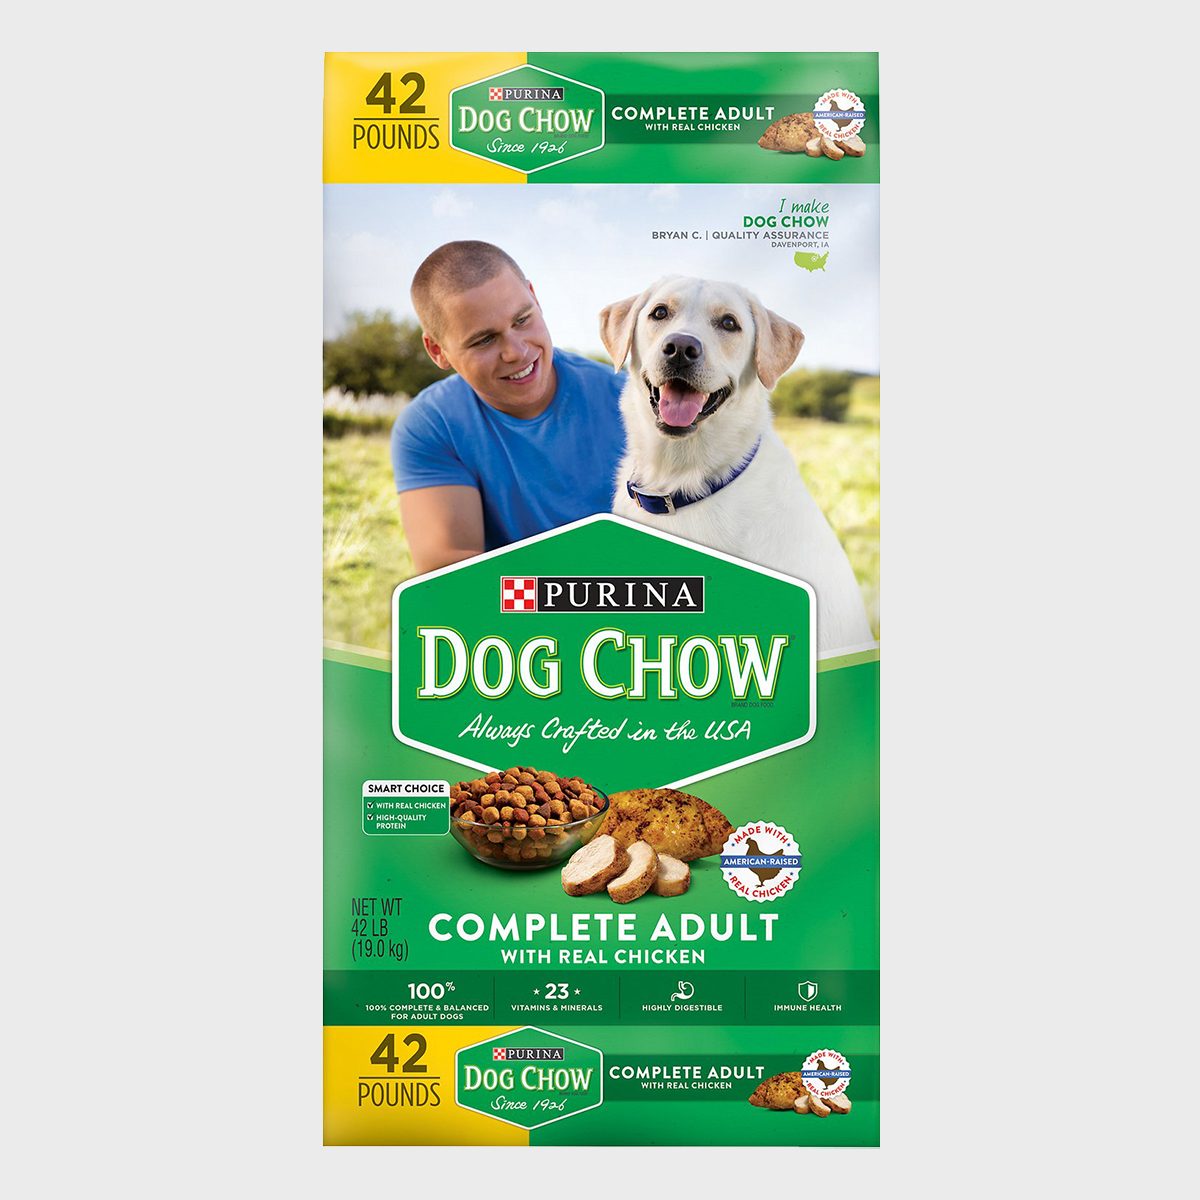 <p>You only want to give your pup the best, but it would be nice if the best didn't break the bank. The good news: It doesn't have to. According to Dr. Navratik, Purina Dog Chow is the way to go—and at just $24.99 for a 42-pound bag, we can totally see why. With real chicken and 23 vitamins and minerals, it provides adult dogs with a complete, balanced diet at just a fraction of the cost of other dry large breed dog foods. Tempted to feed your pup some table food? These are the <a href="https://www.rd.com/article/vegetables-fruits-dogs-can-cant-eat/">fruits and vegetables dogs can (and can't) eat</a>.</p> <p><strong>Highlights:</strong></p> <ul> <li>Wallet-friendly</li> <li>Contains 23 vitamins and minerals, including biotin</li> <li>Helps to clean your dog's teeth</li> </ul> <p class="listicle-page__cta-button-shop"><a class="shop-btn" href="https://www.chewy.com/dog-chow-complete-adult-real-chicken/dp/127736">Shop Now</a></p>